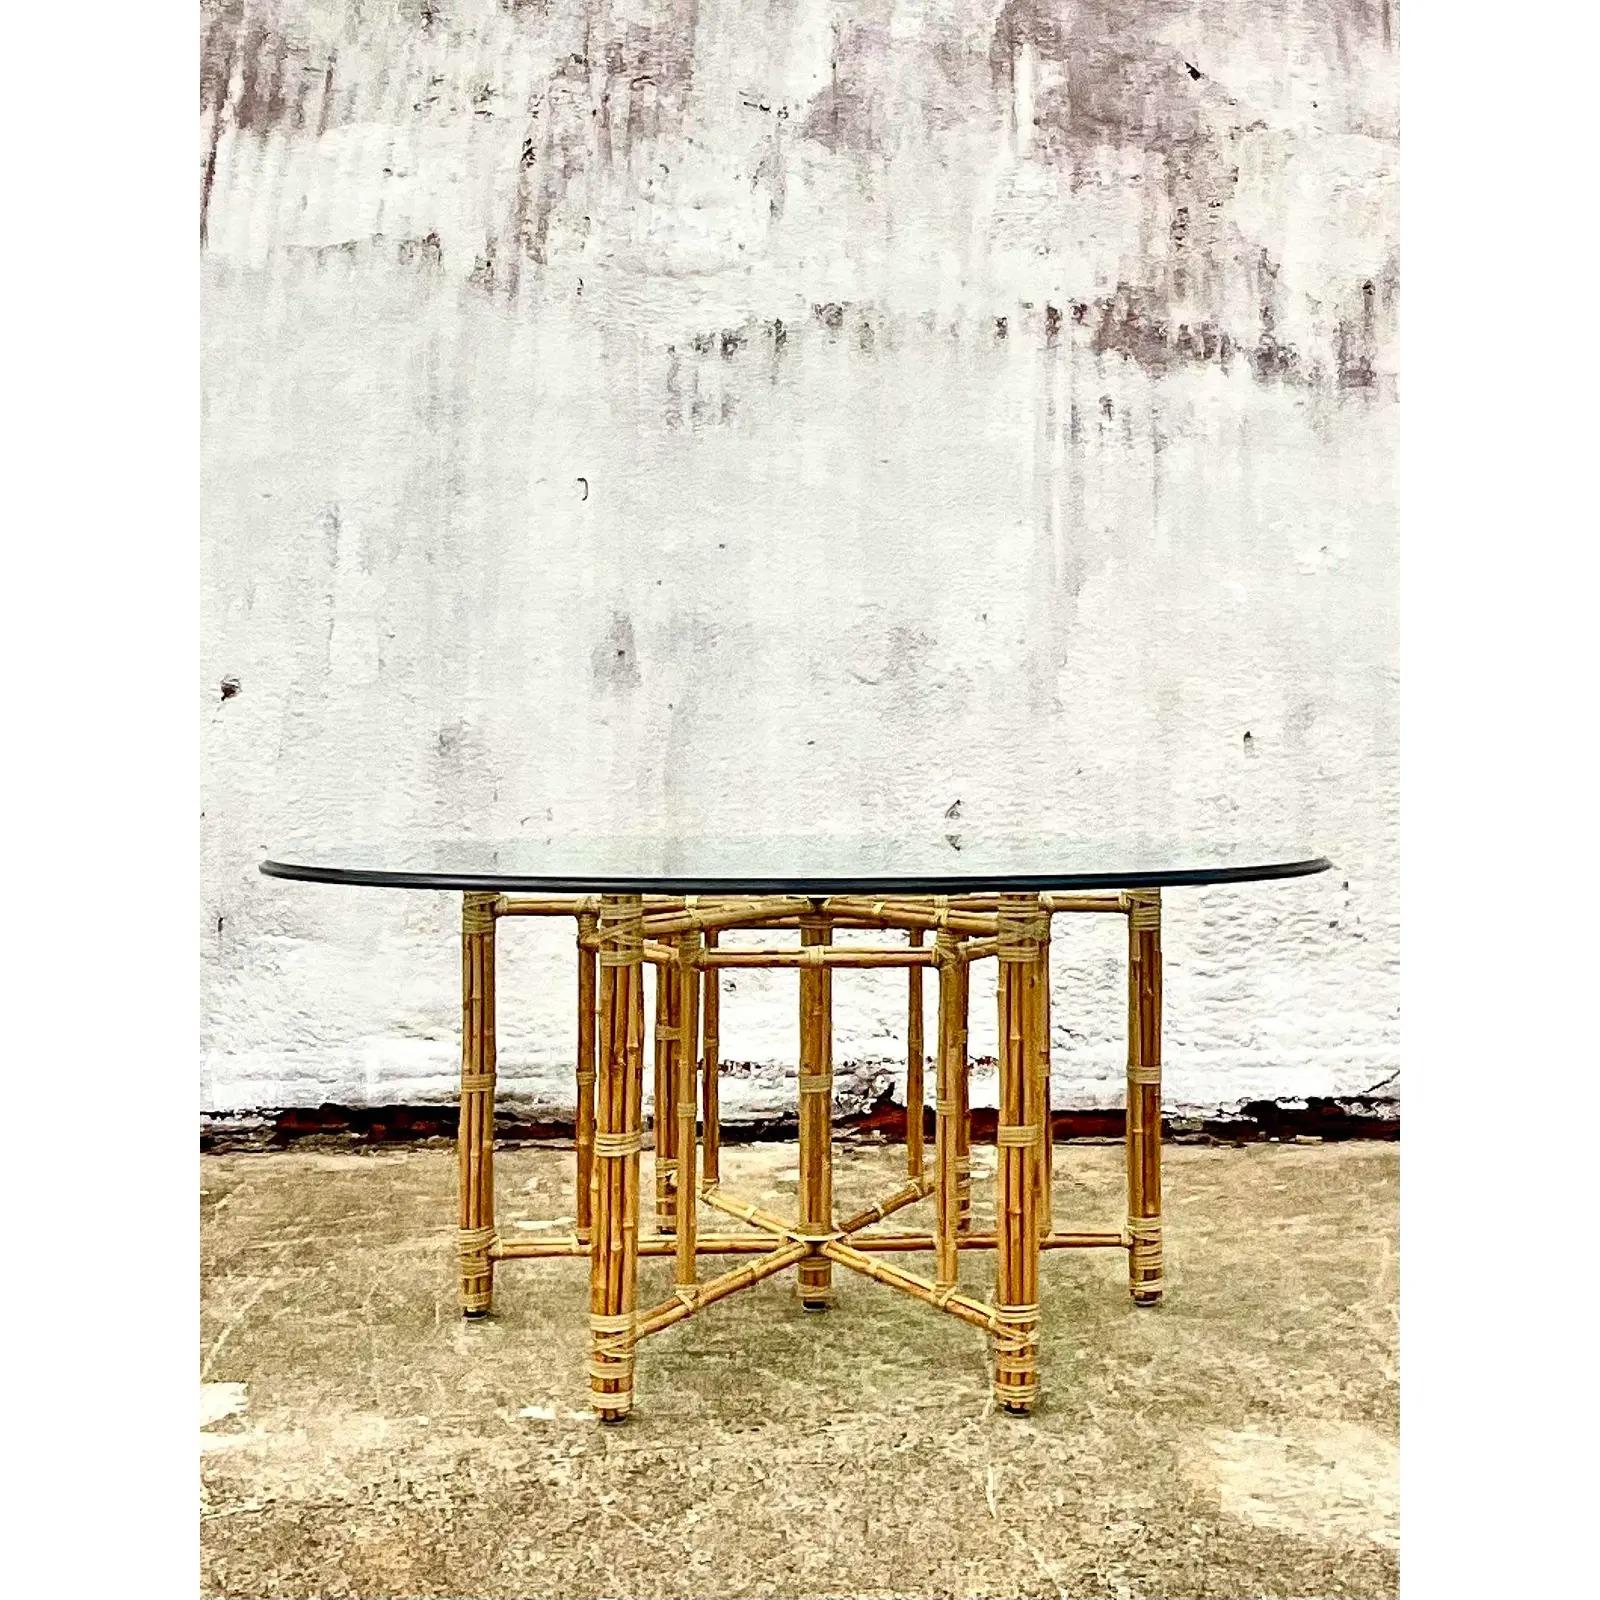 Fantastic vintage McGuire dining table. Steel frame wrapped in bamboo and bundled together with rawhide strips. A real work of art. Thick glass with a beveled edge. Acquired from a Palm Beach estate.